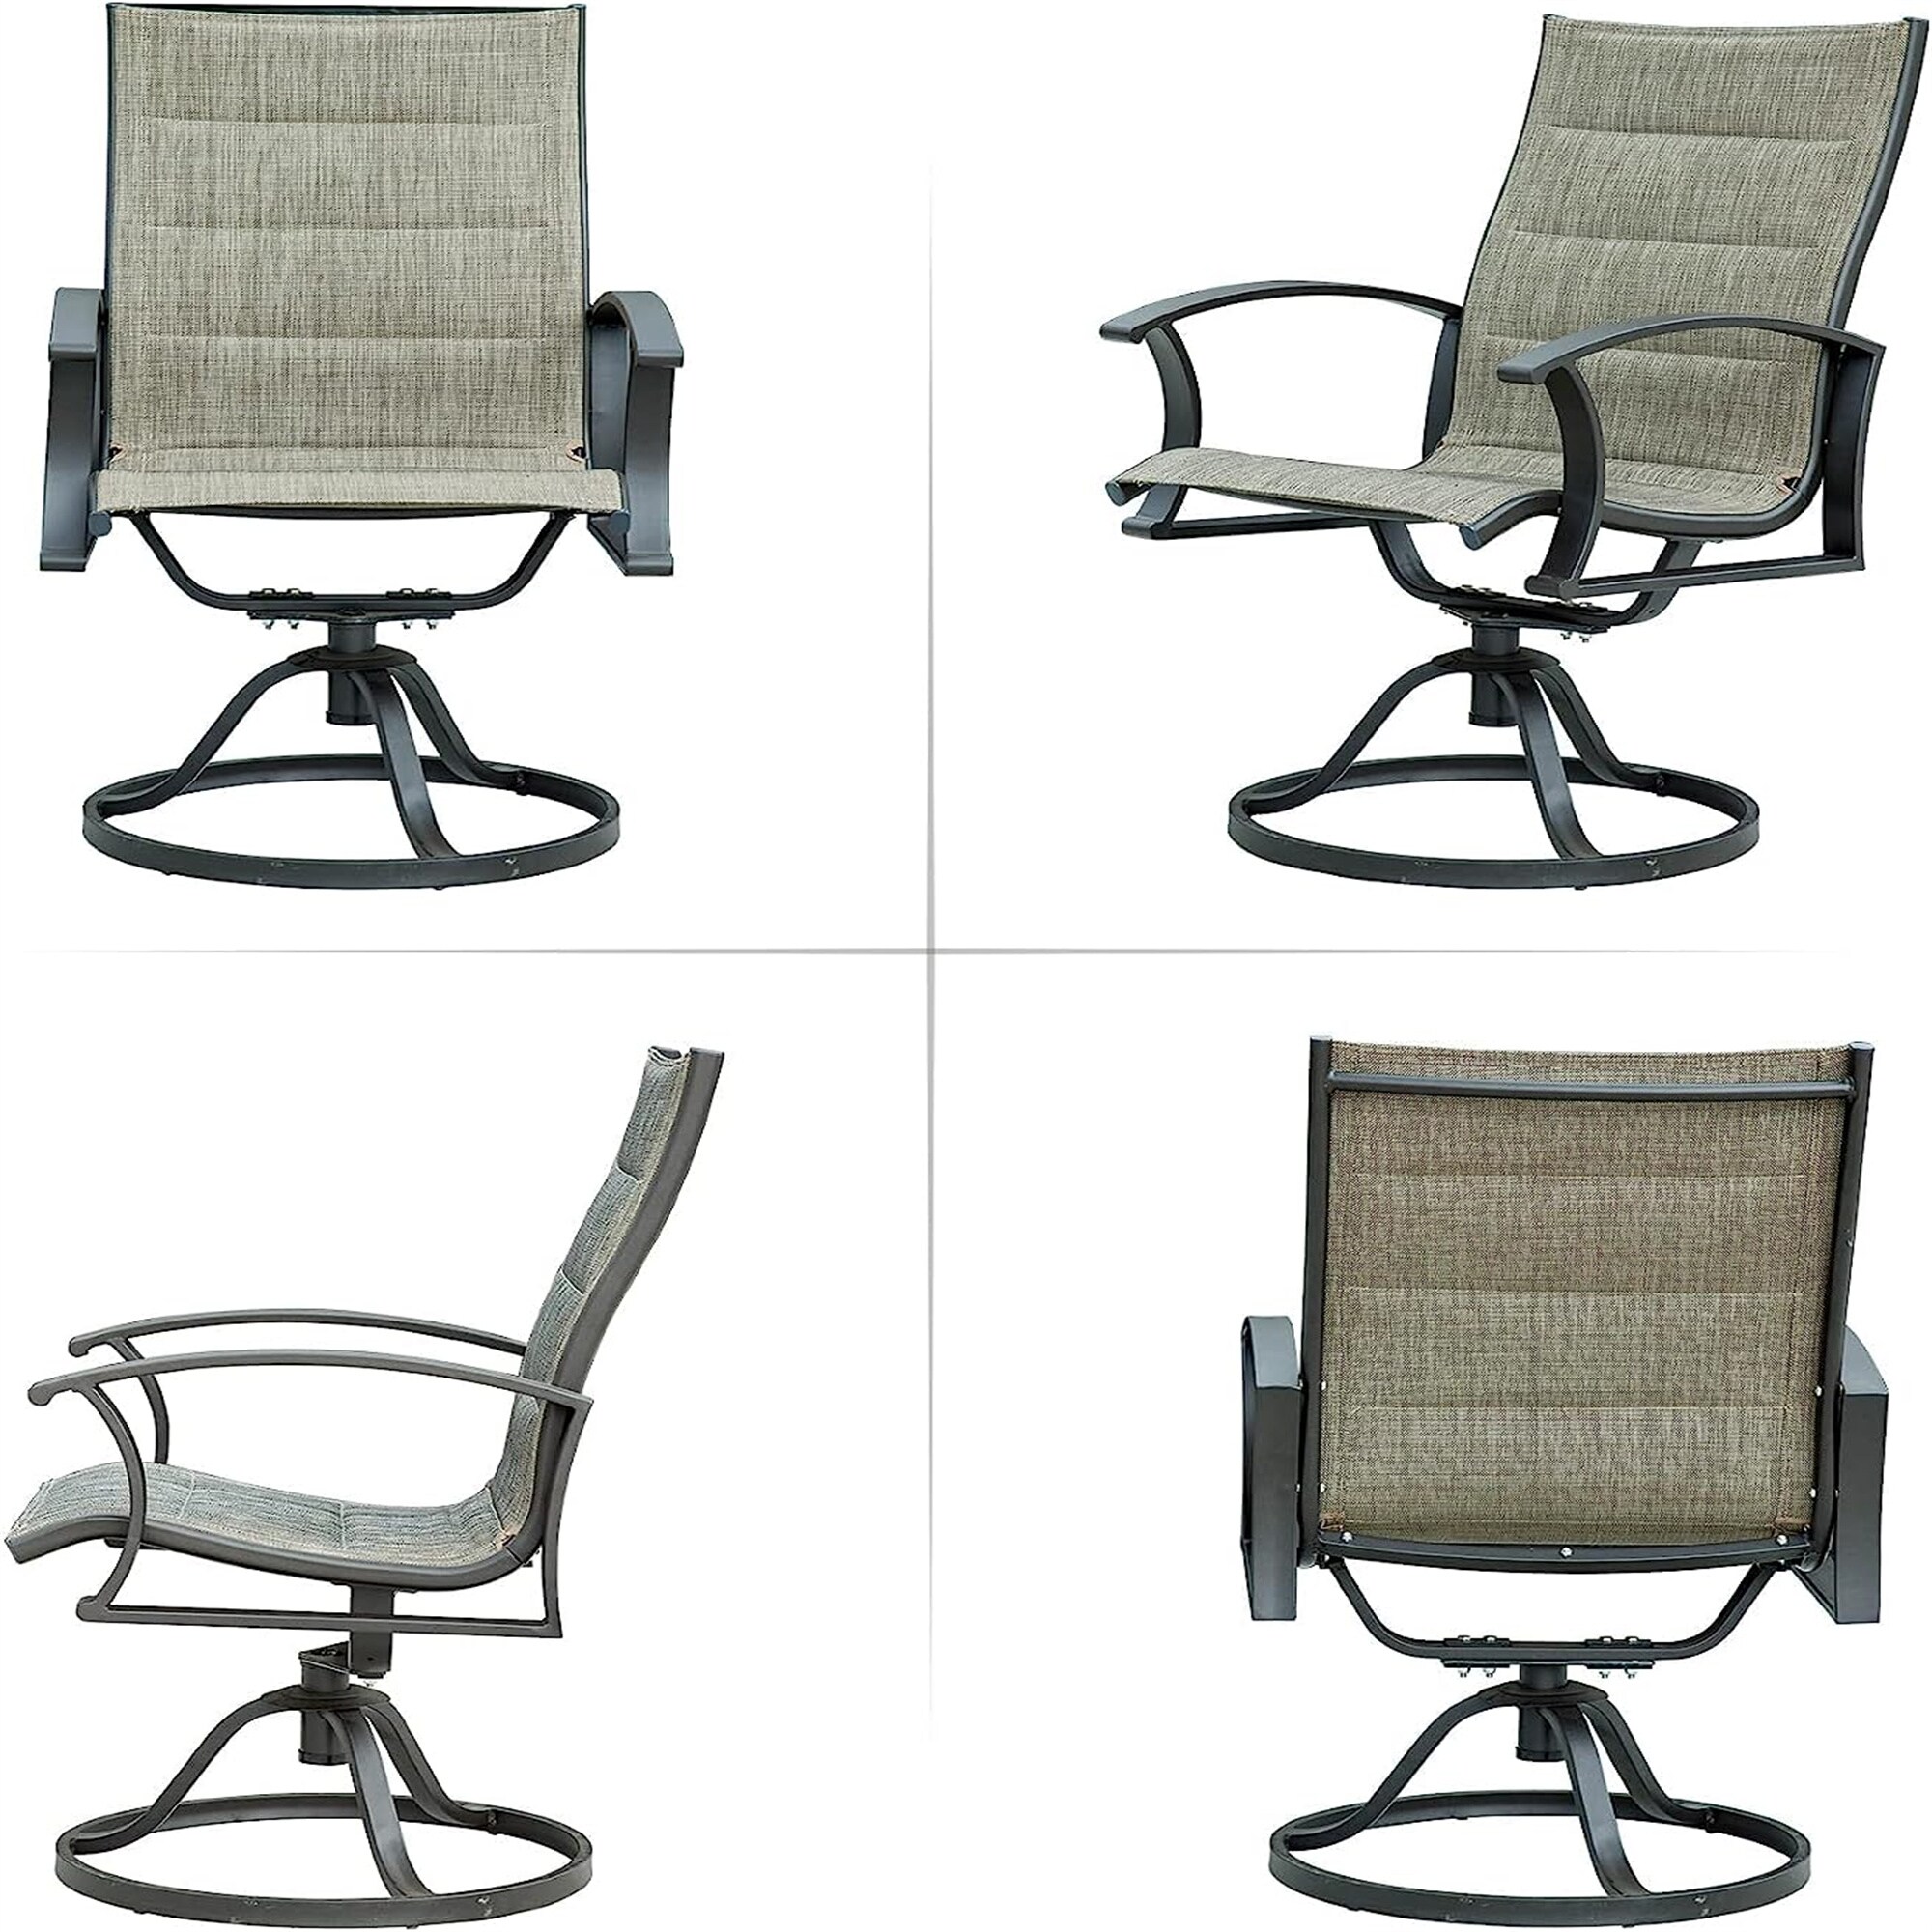 Clihome Patio Swivel Chairs Set of 2 Black Steel Frame Swivel Dining ...